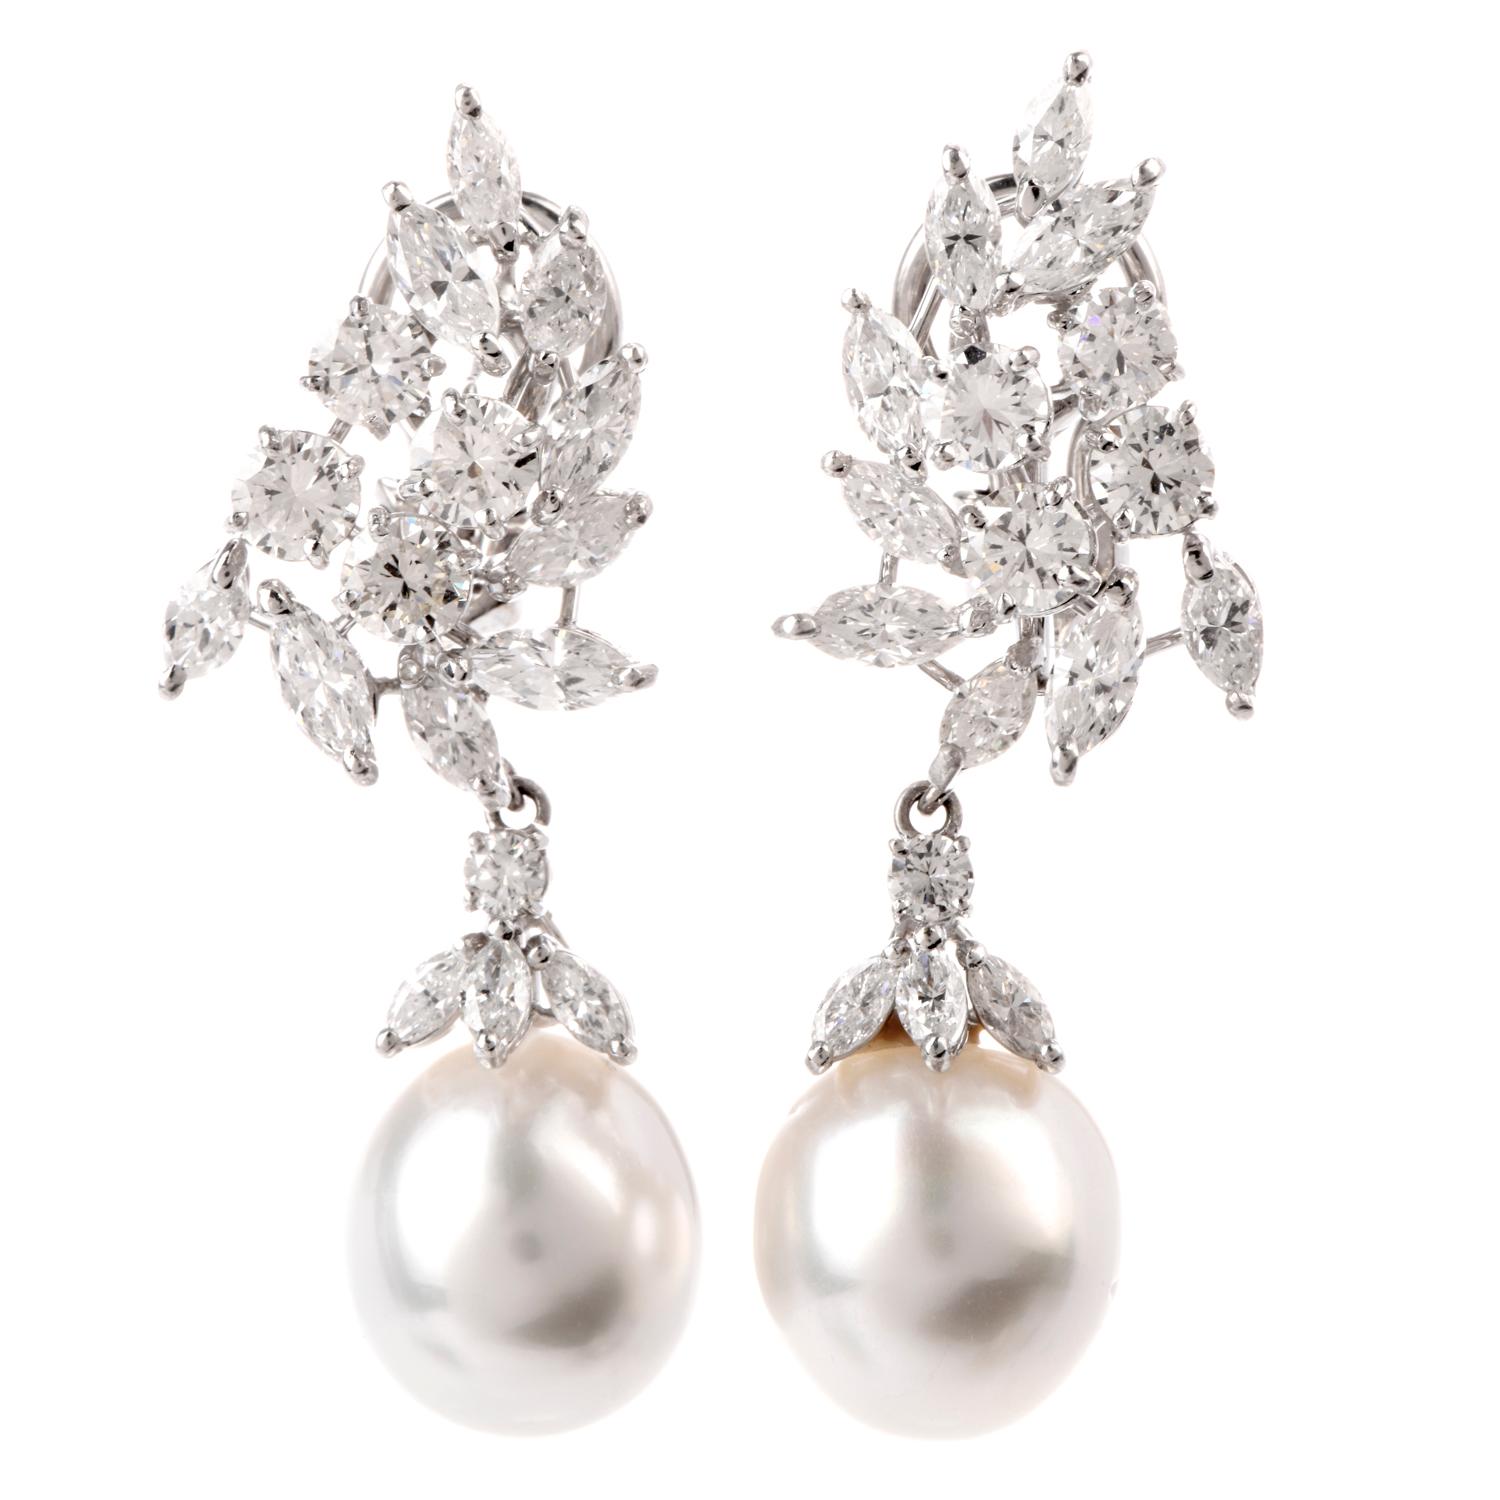 These stunning Diamond and Pearl Dangle earrings were inspired in a Leaf design and crafted in 18.4 grams of Platinum.

Adorning the earrings are multiple round and marquise shaped diamonds in a leaf pattern weighing approximately 7.30 carats and